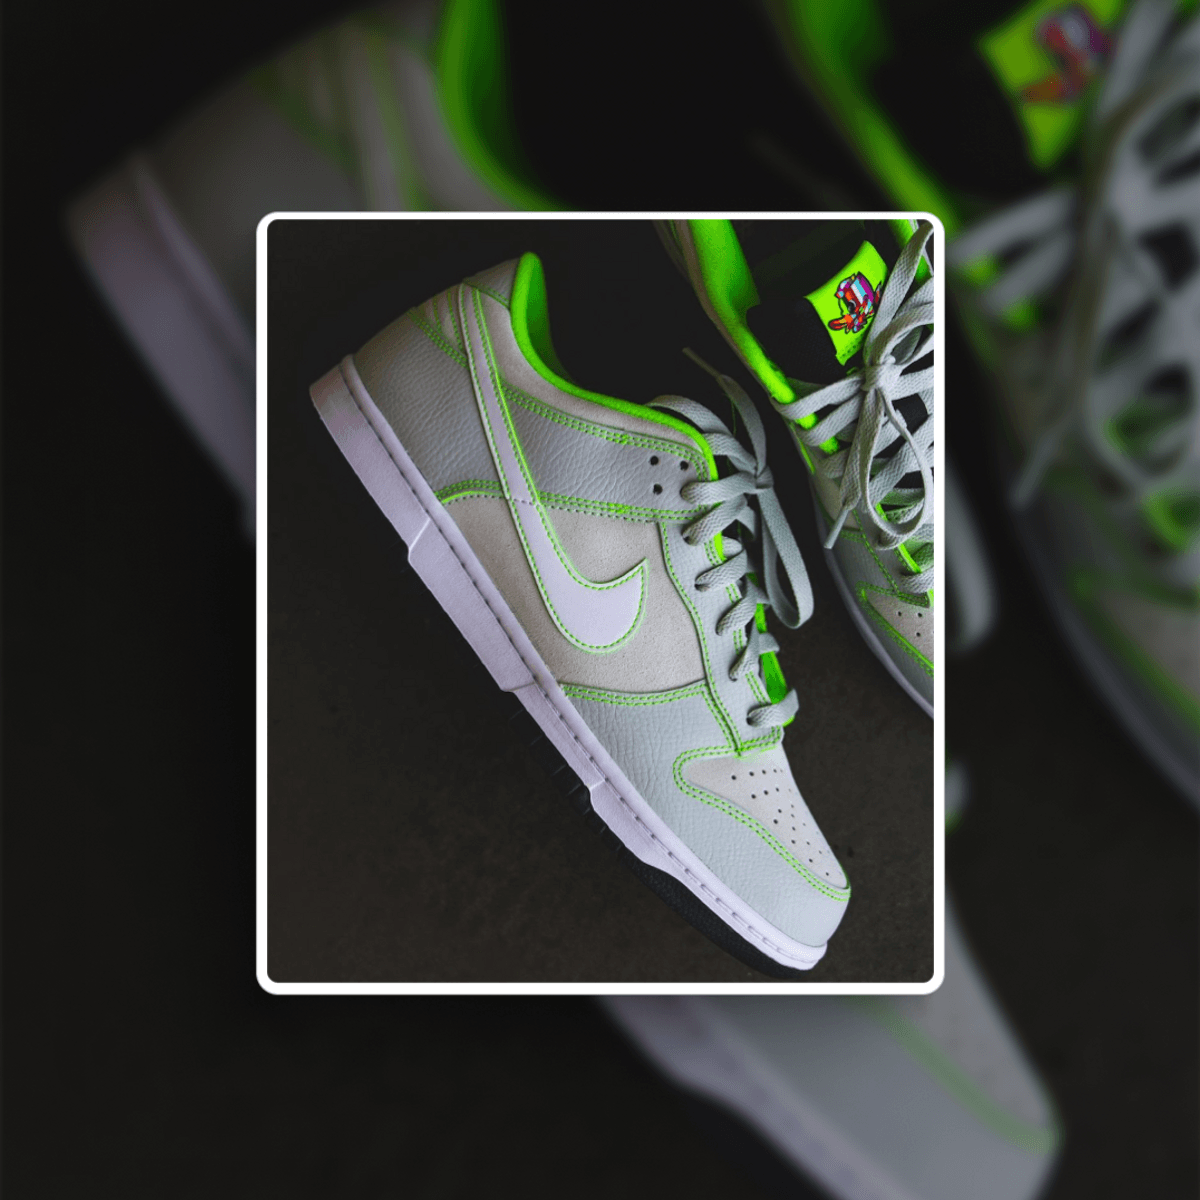 The Nike Dunk Low Oregon Ducks Of A Feather PE Was Designed By The Legendary Tinker Hatfield